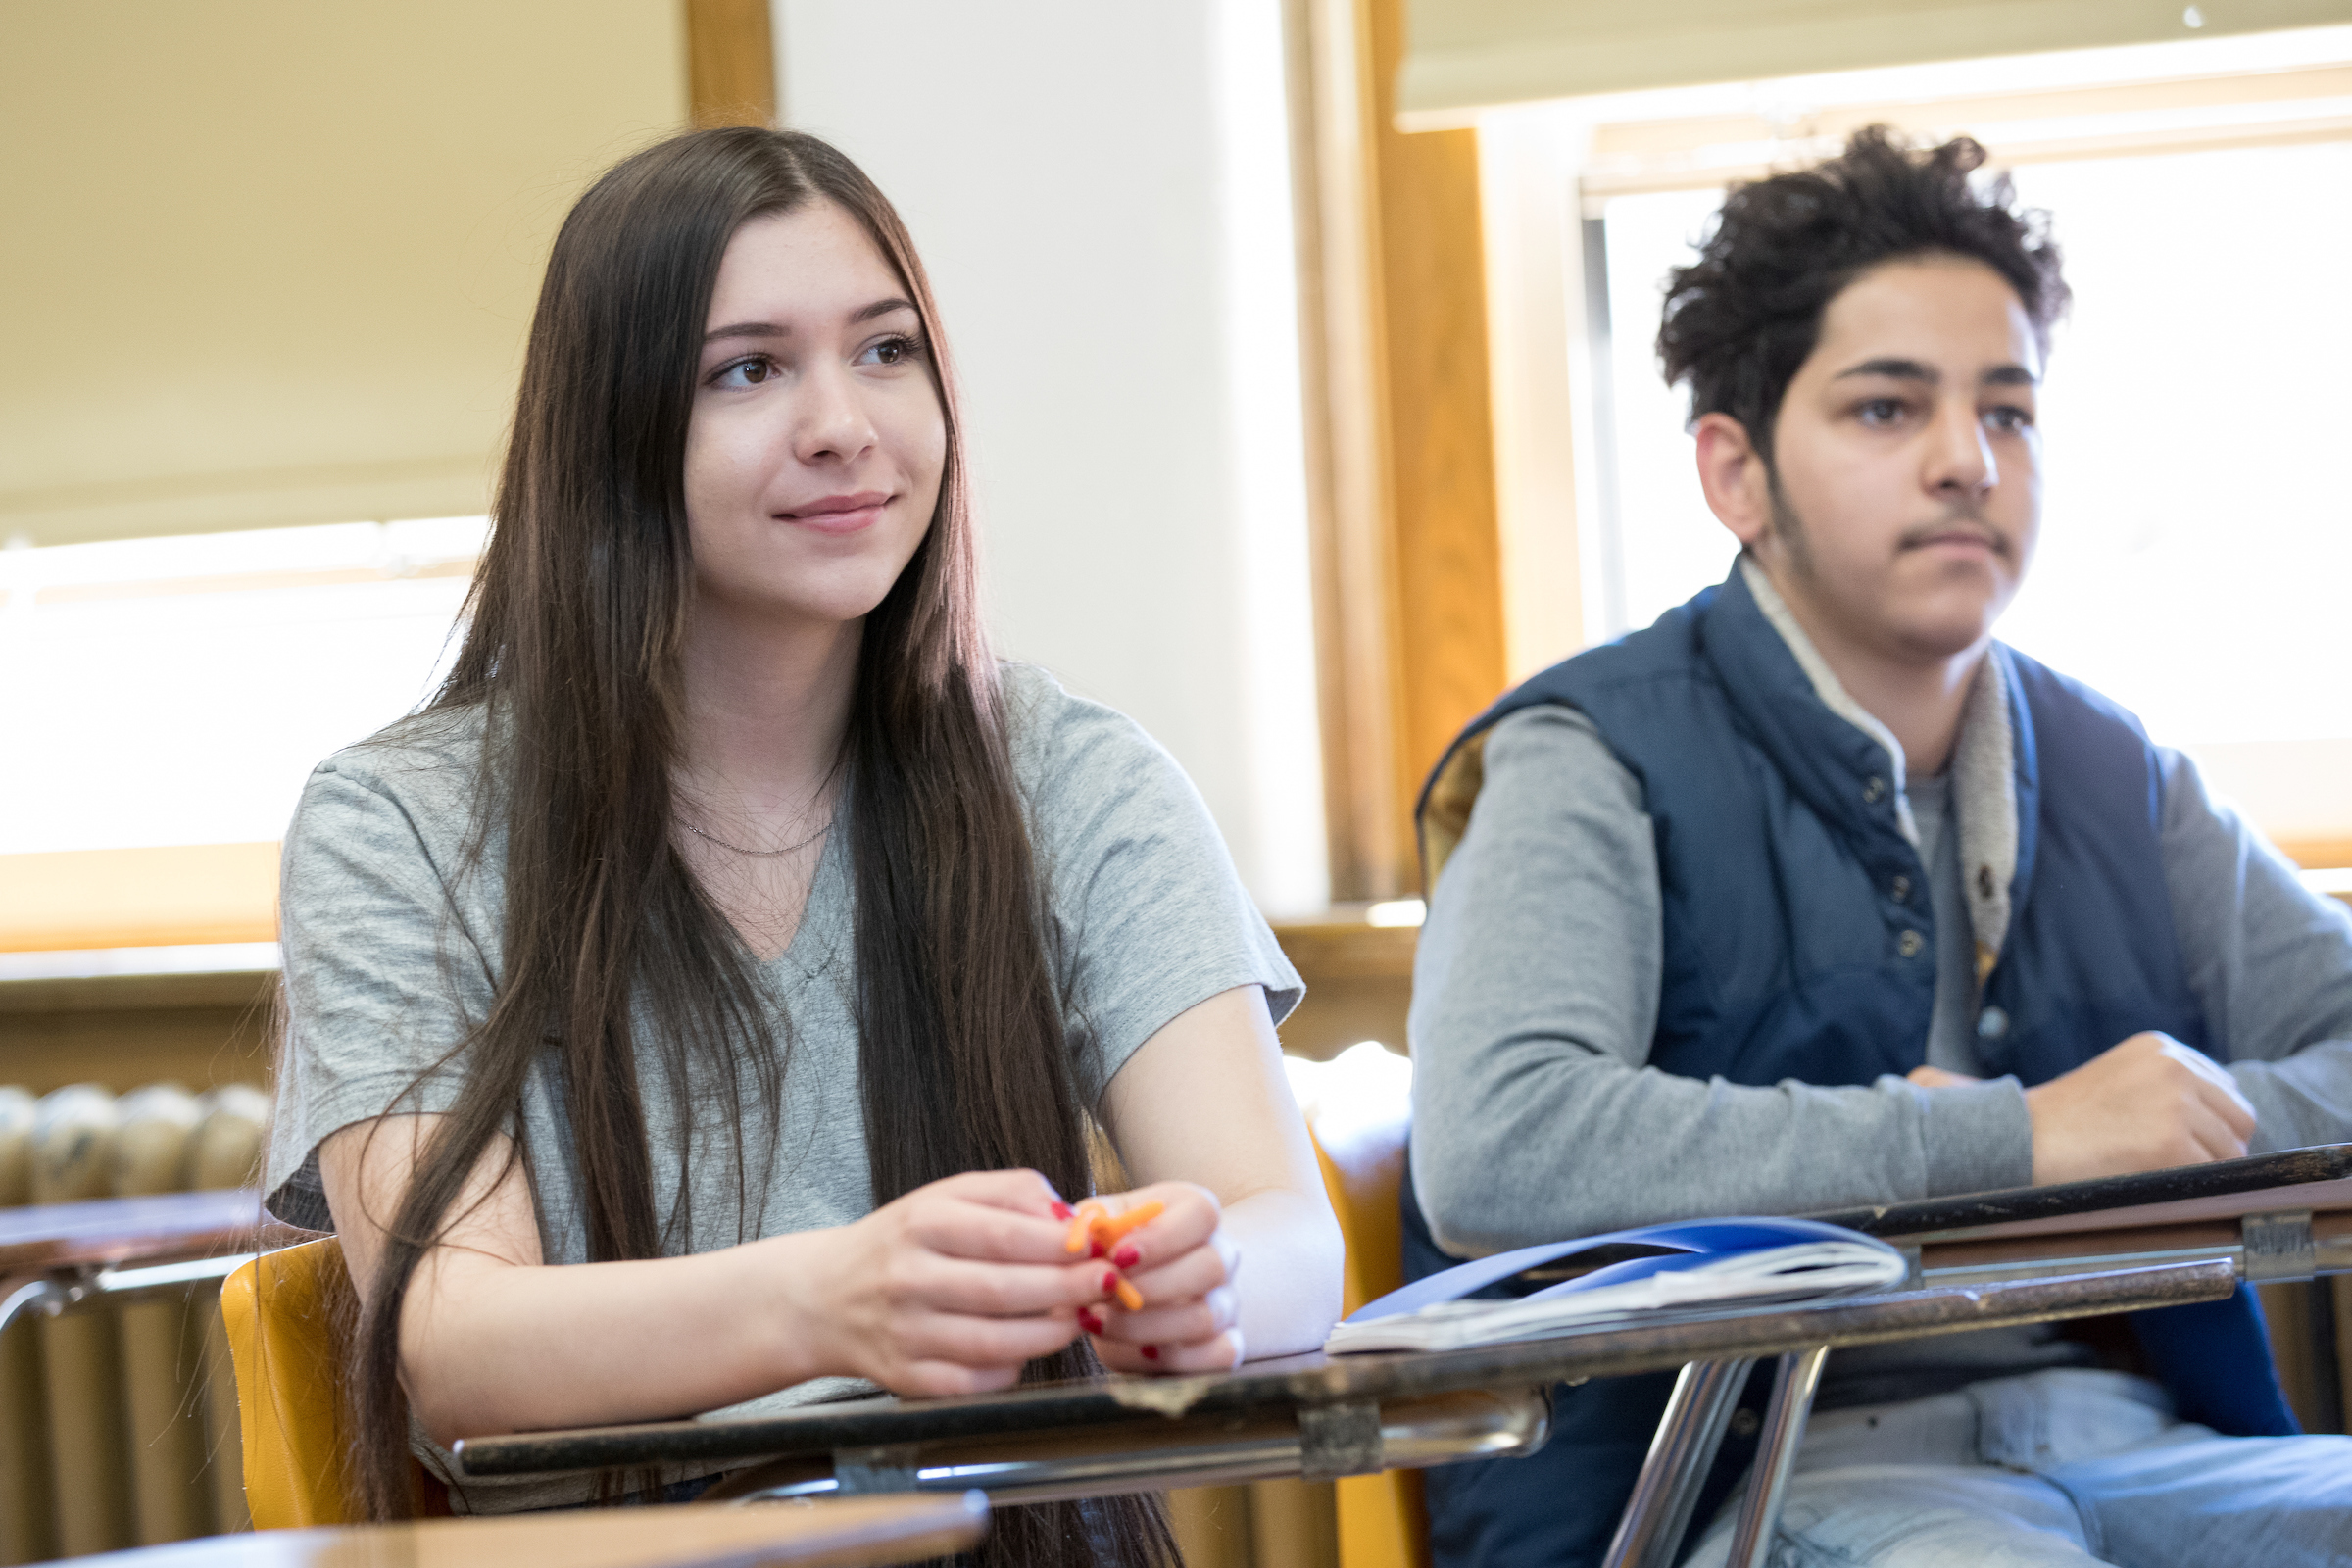 Two teens sitting at classroom desks